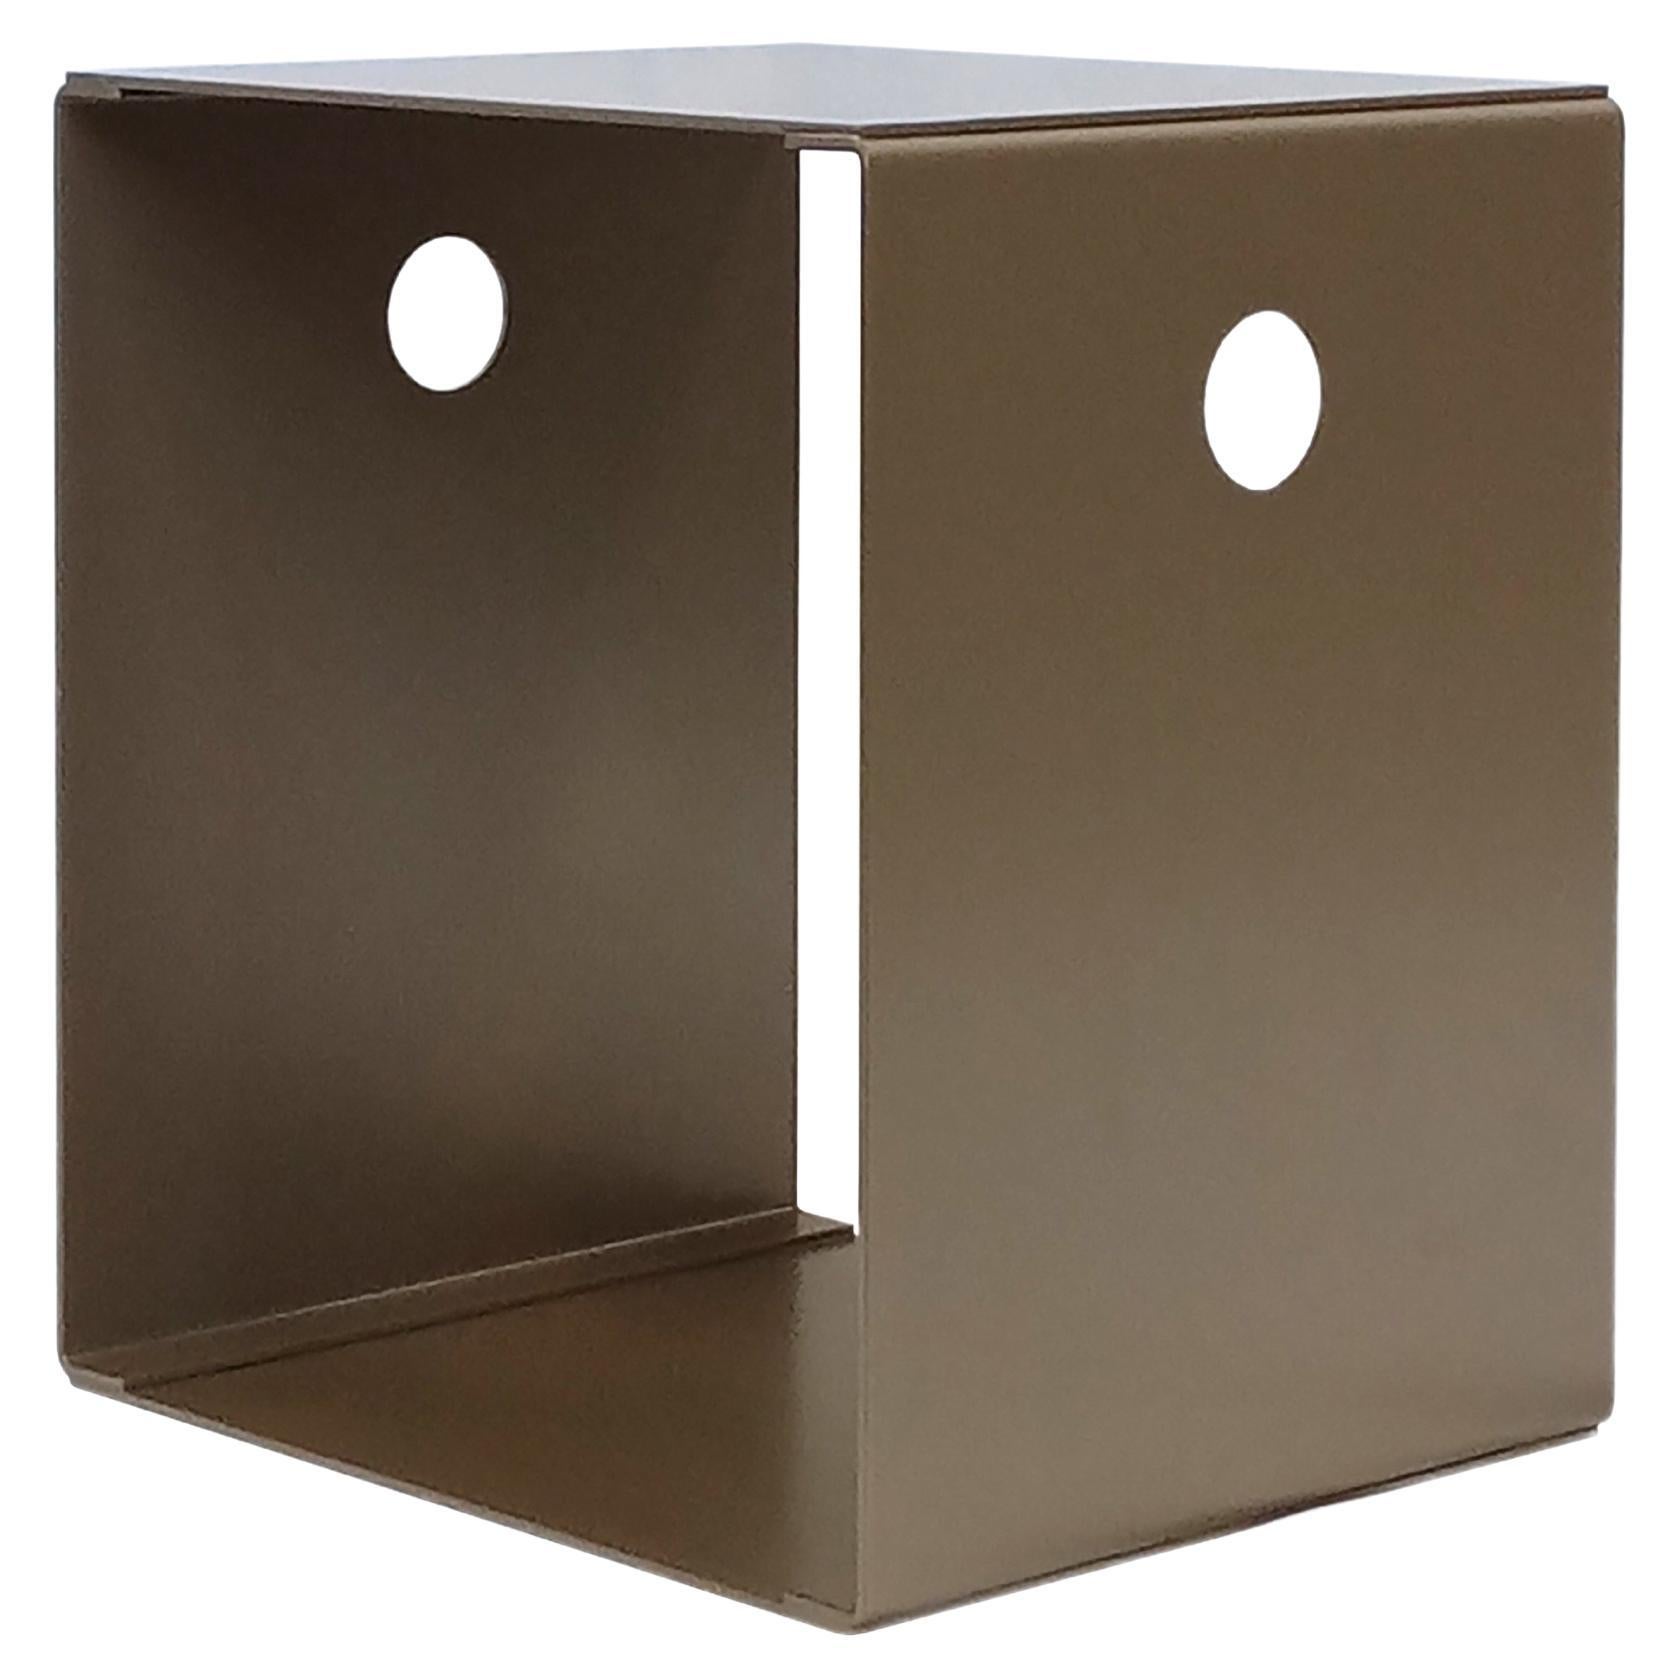 Set of 2 Italian Contemporary Steel Bookcase/Side Table, "Micropolis" by Errante